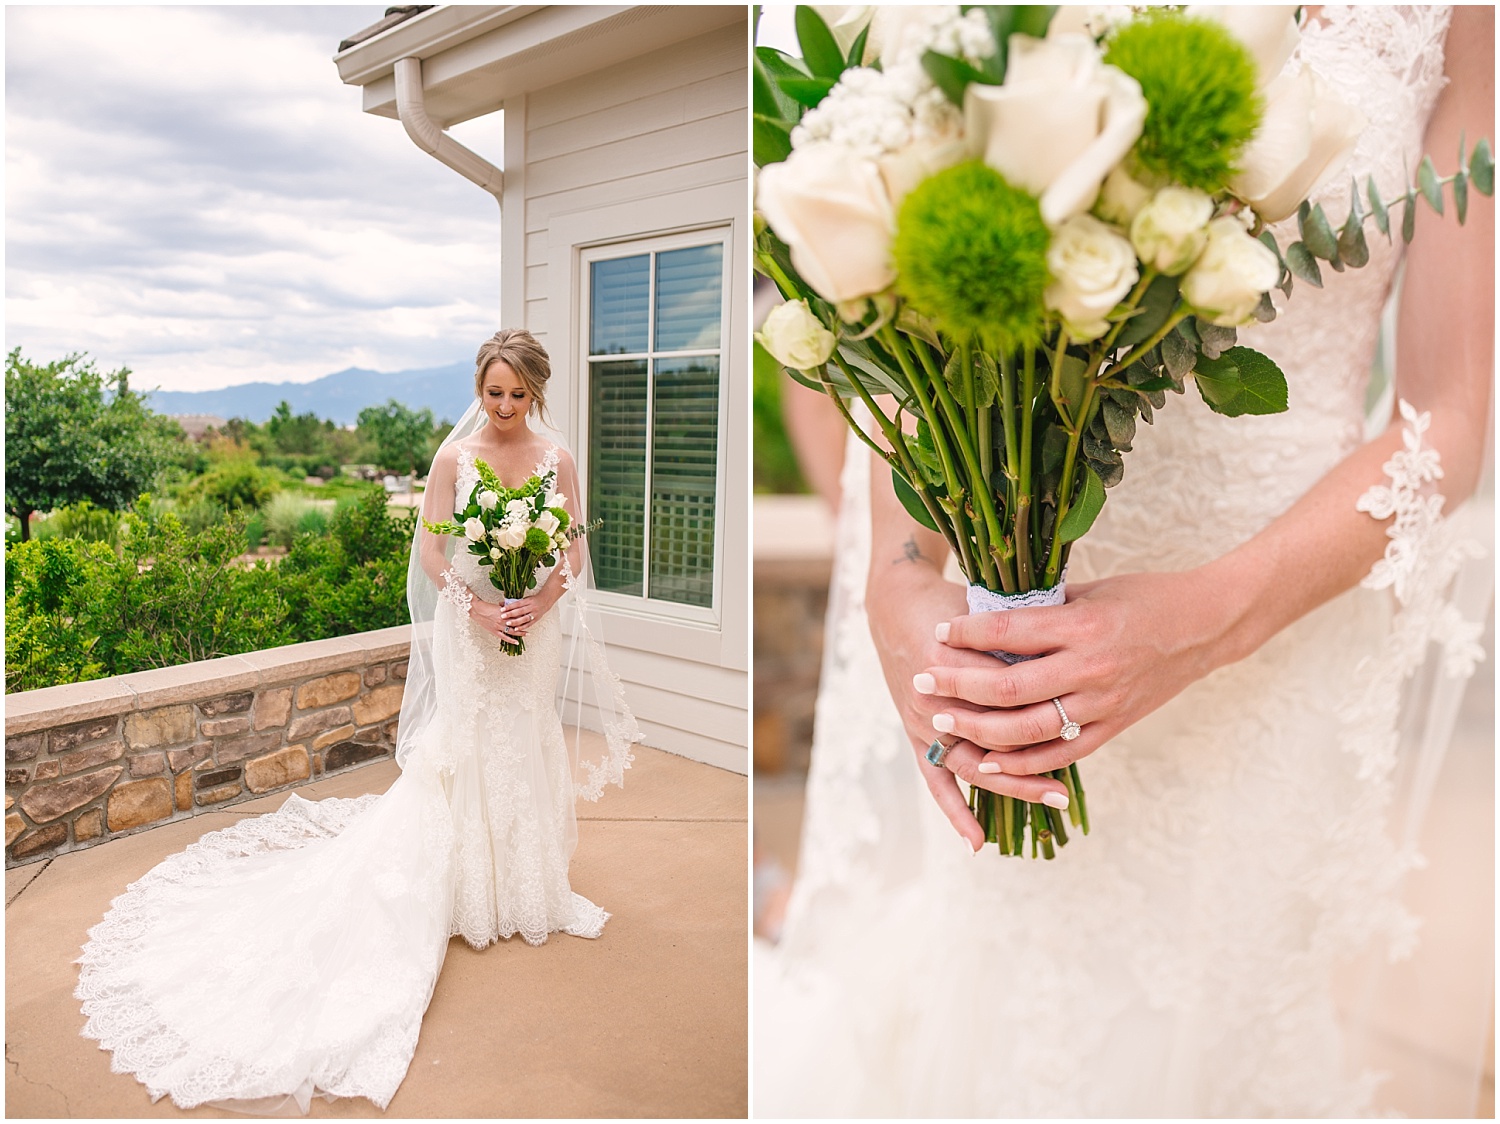 Bride with a long train and bouquet of white roses and natural greenery at Cordera wedding in Colorado Springs